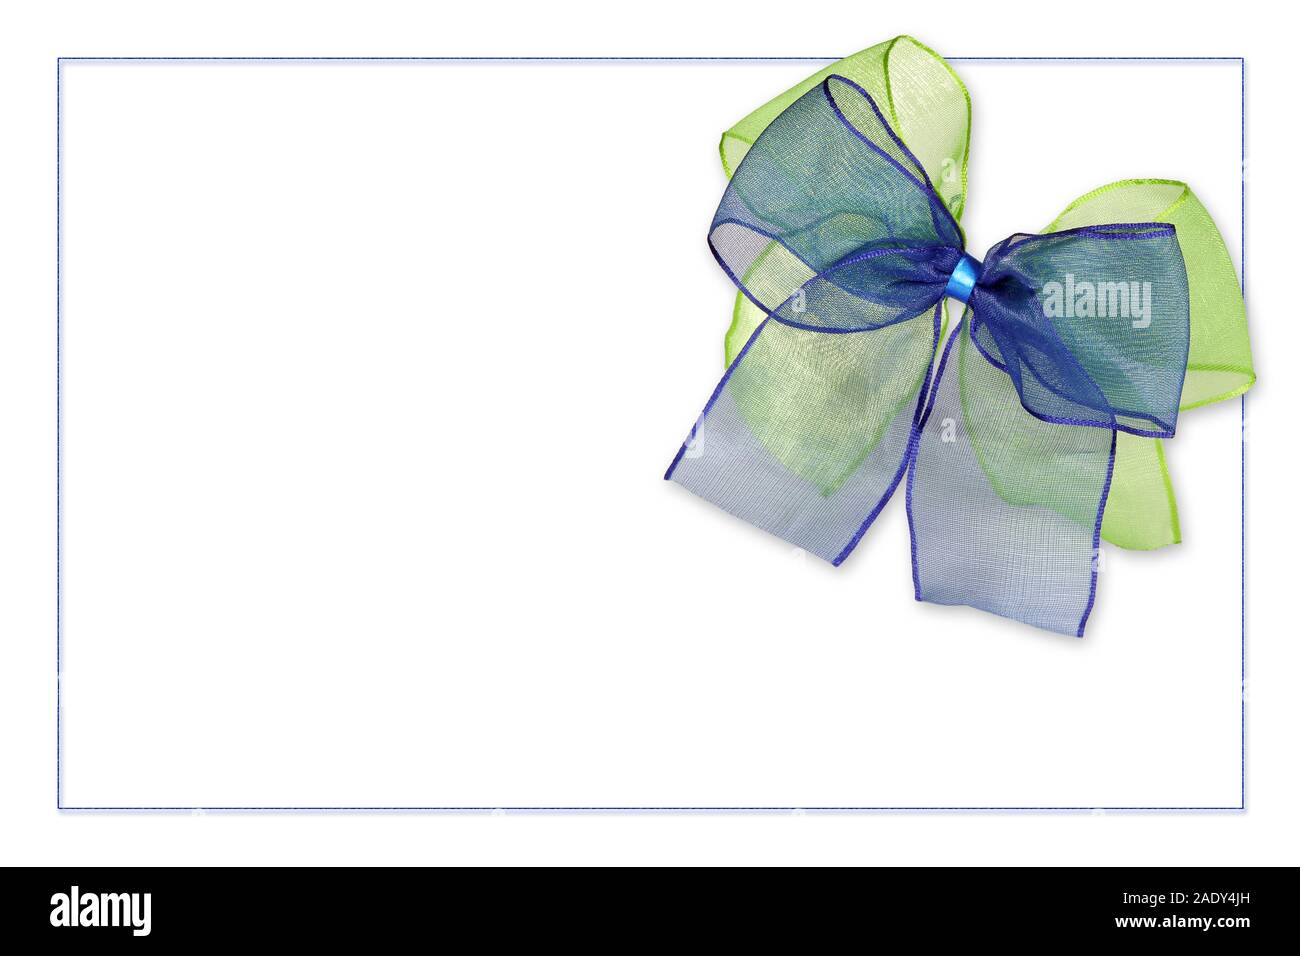 Green and blue gift bow with frame, gift coupon Stock Photo